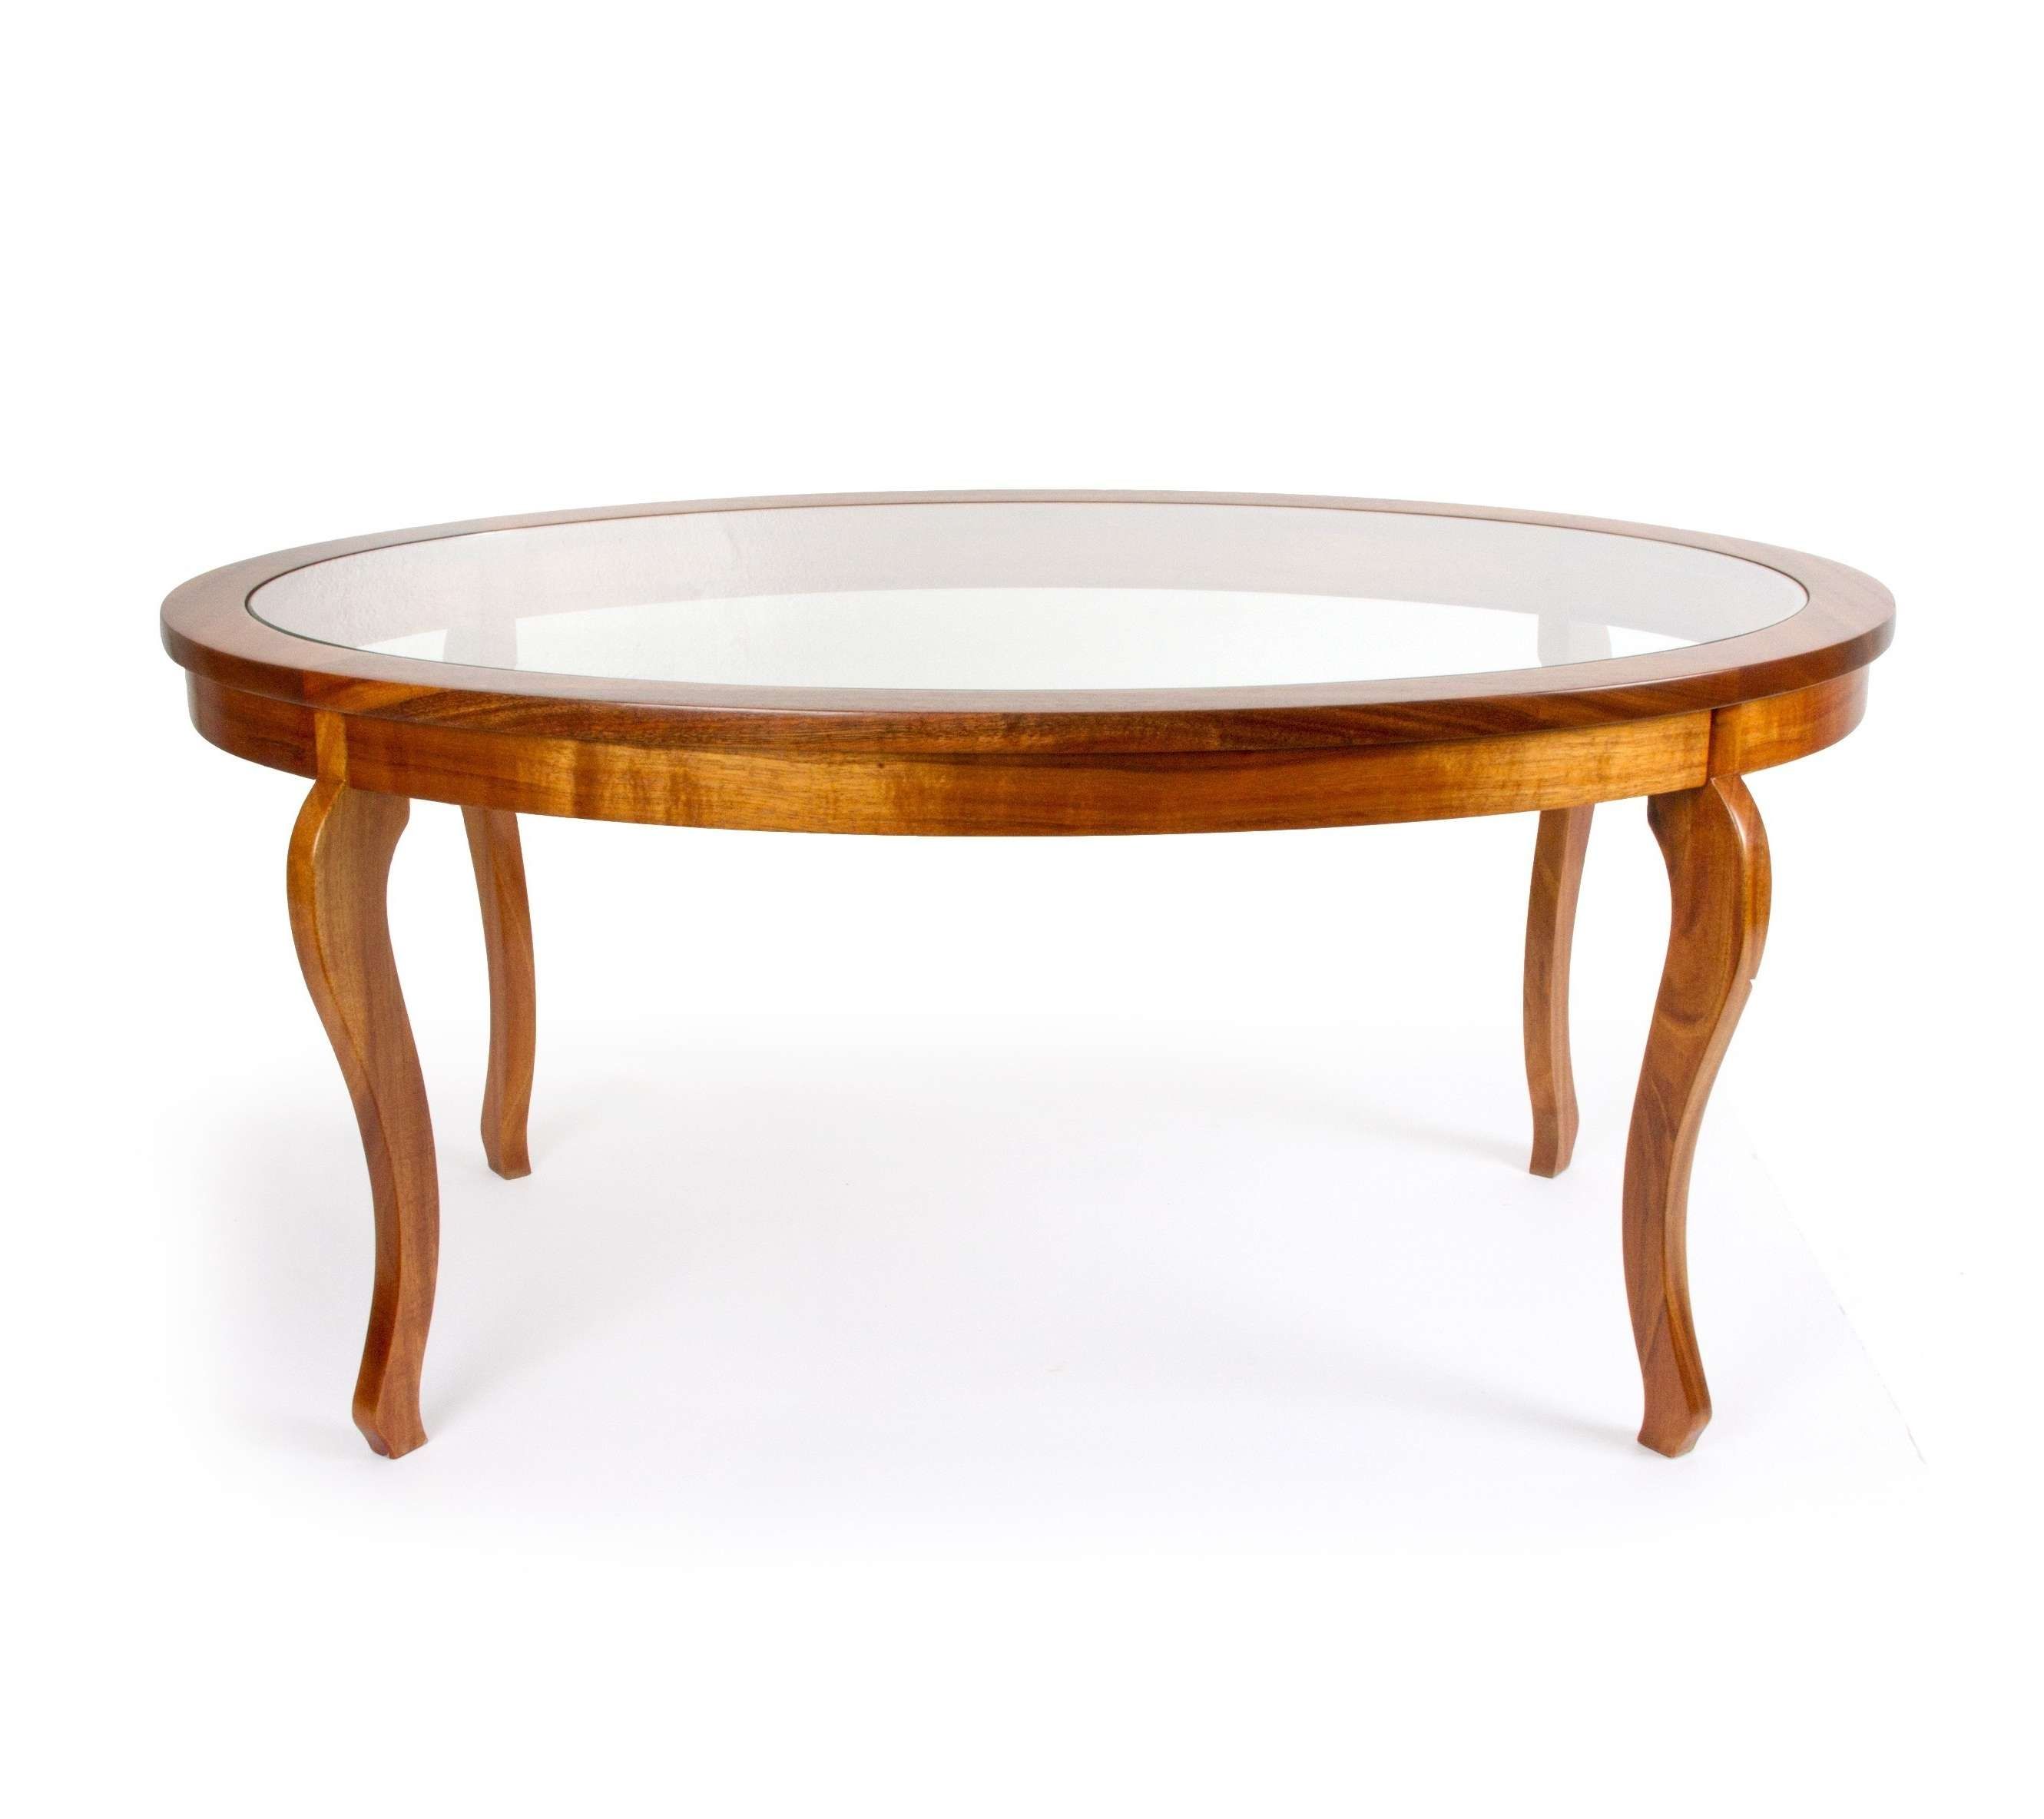 Small Round Pine Coffee Table Round Coffee Tables Wayfair – Ezol Decor Within Trendy Round Pine Coffee Tables (View 4 of 20)